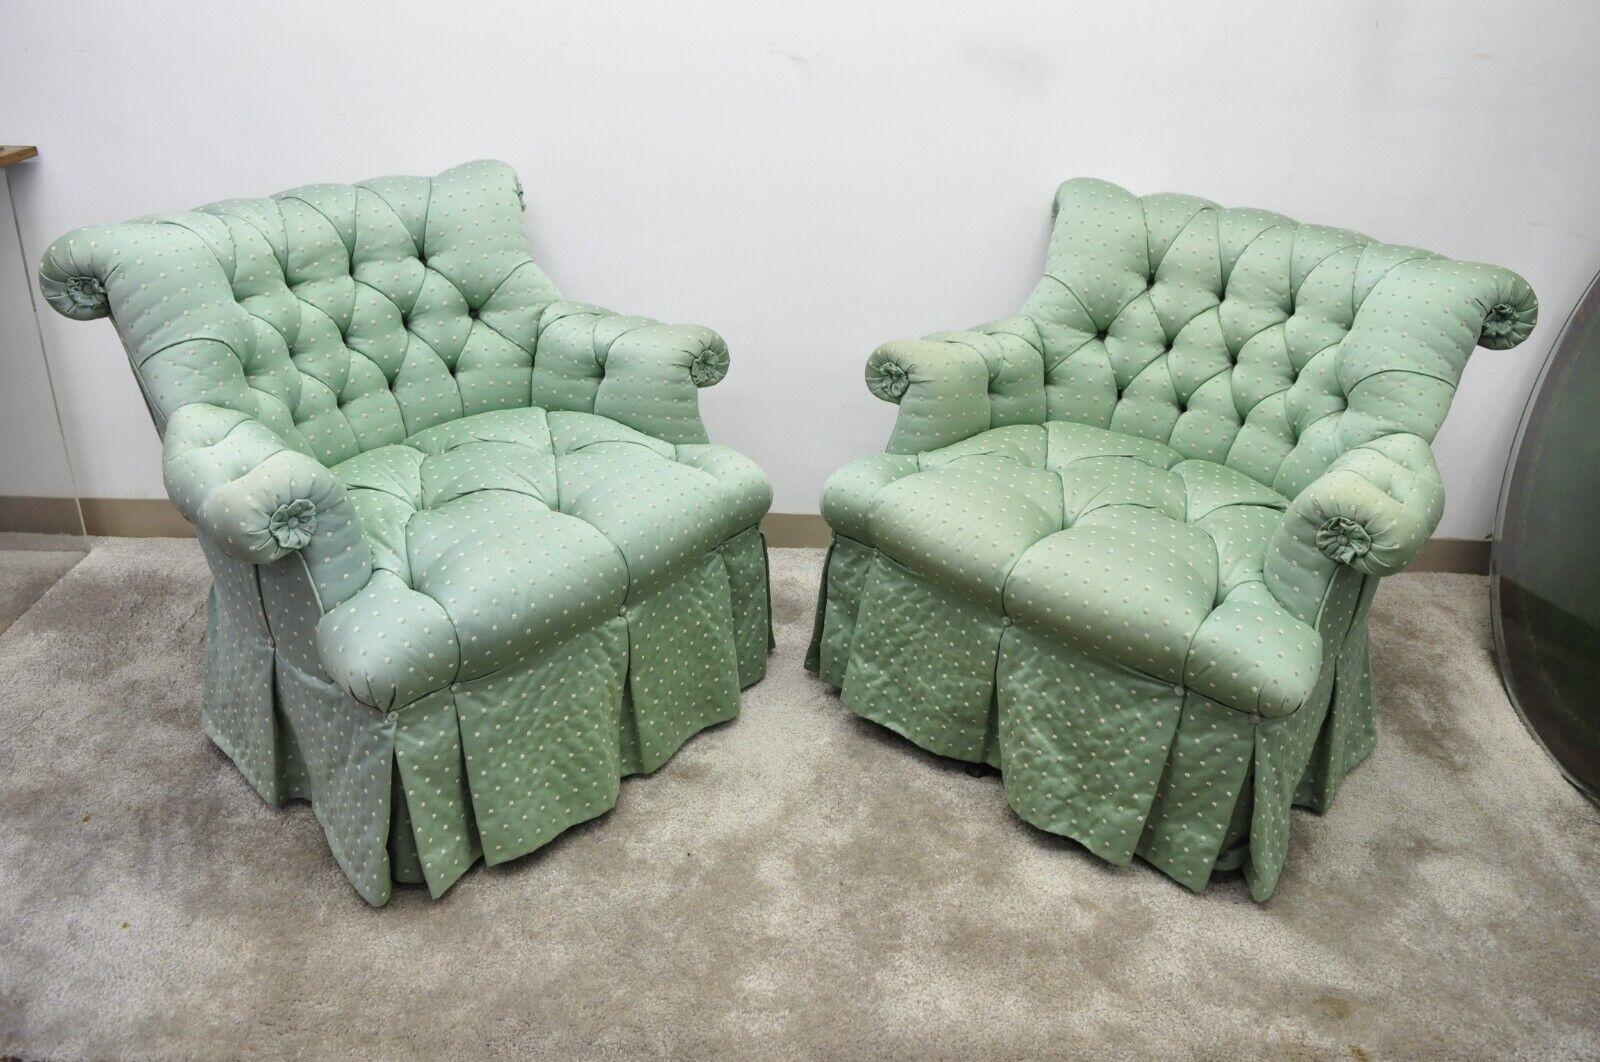 MarCo Napoleon III Style green tufted swivel lounge chairs and Ottomans - a Pair. Item features (2) chairs, (2) ottomans, swivel and tilt frames, green tufted upholstery, skirted base, rolled arms and back, ottomans with wooden legs, original label,